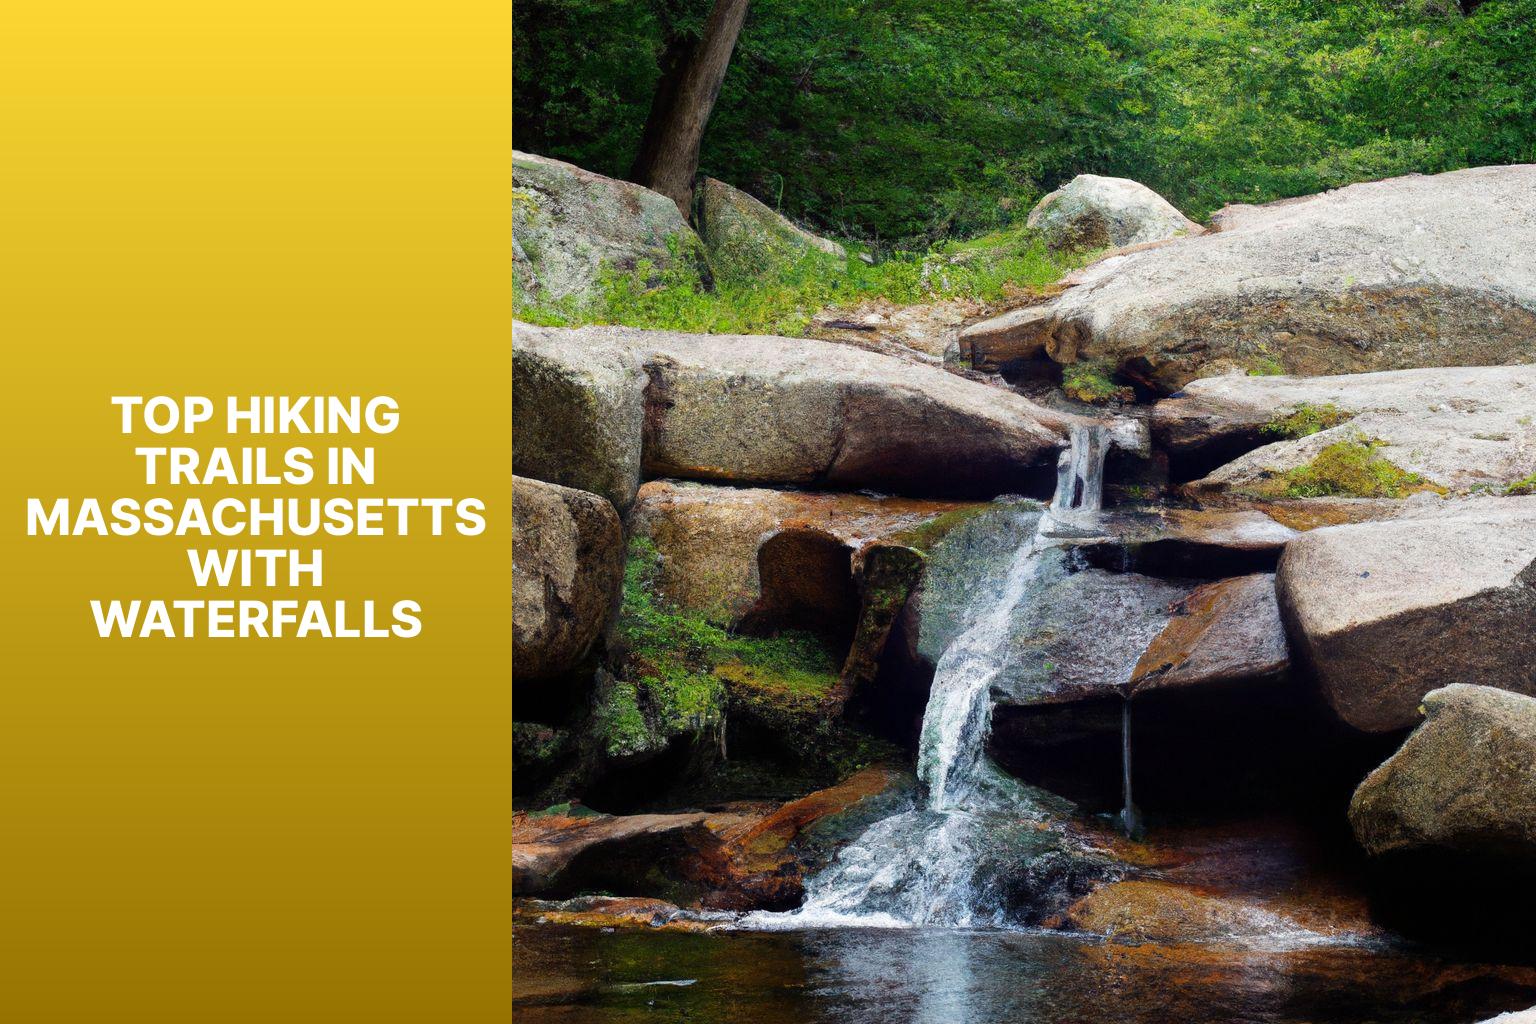 Top Hiking Trails in Massachusetts With Waterfalls - Hiking Trails in Massachusetts With Waterfalls 